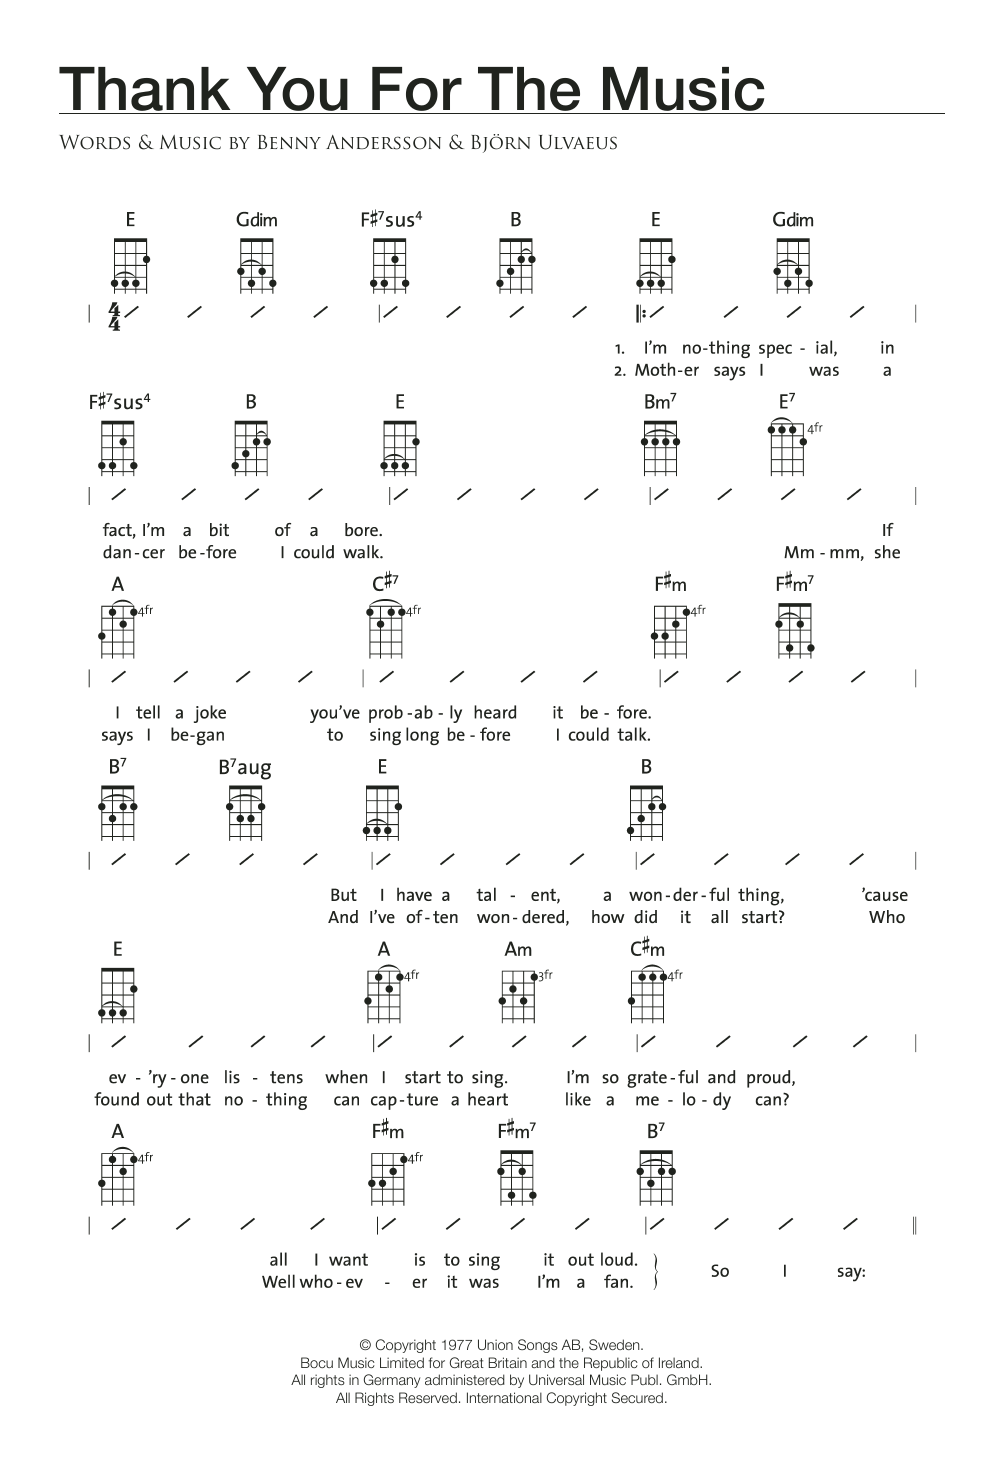 Download ABBA Thank You For The Music Sheet Music